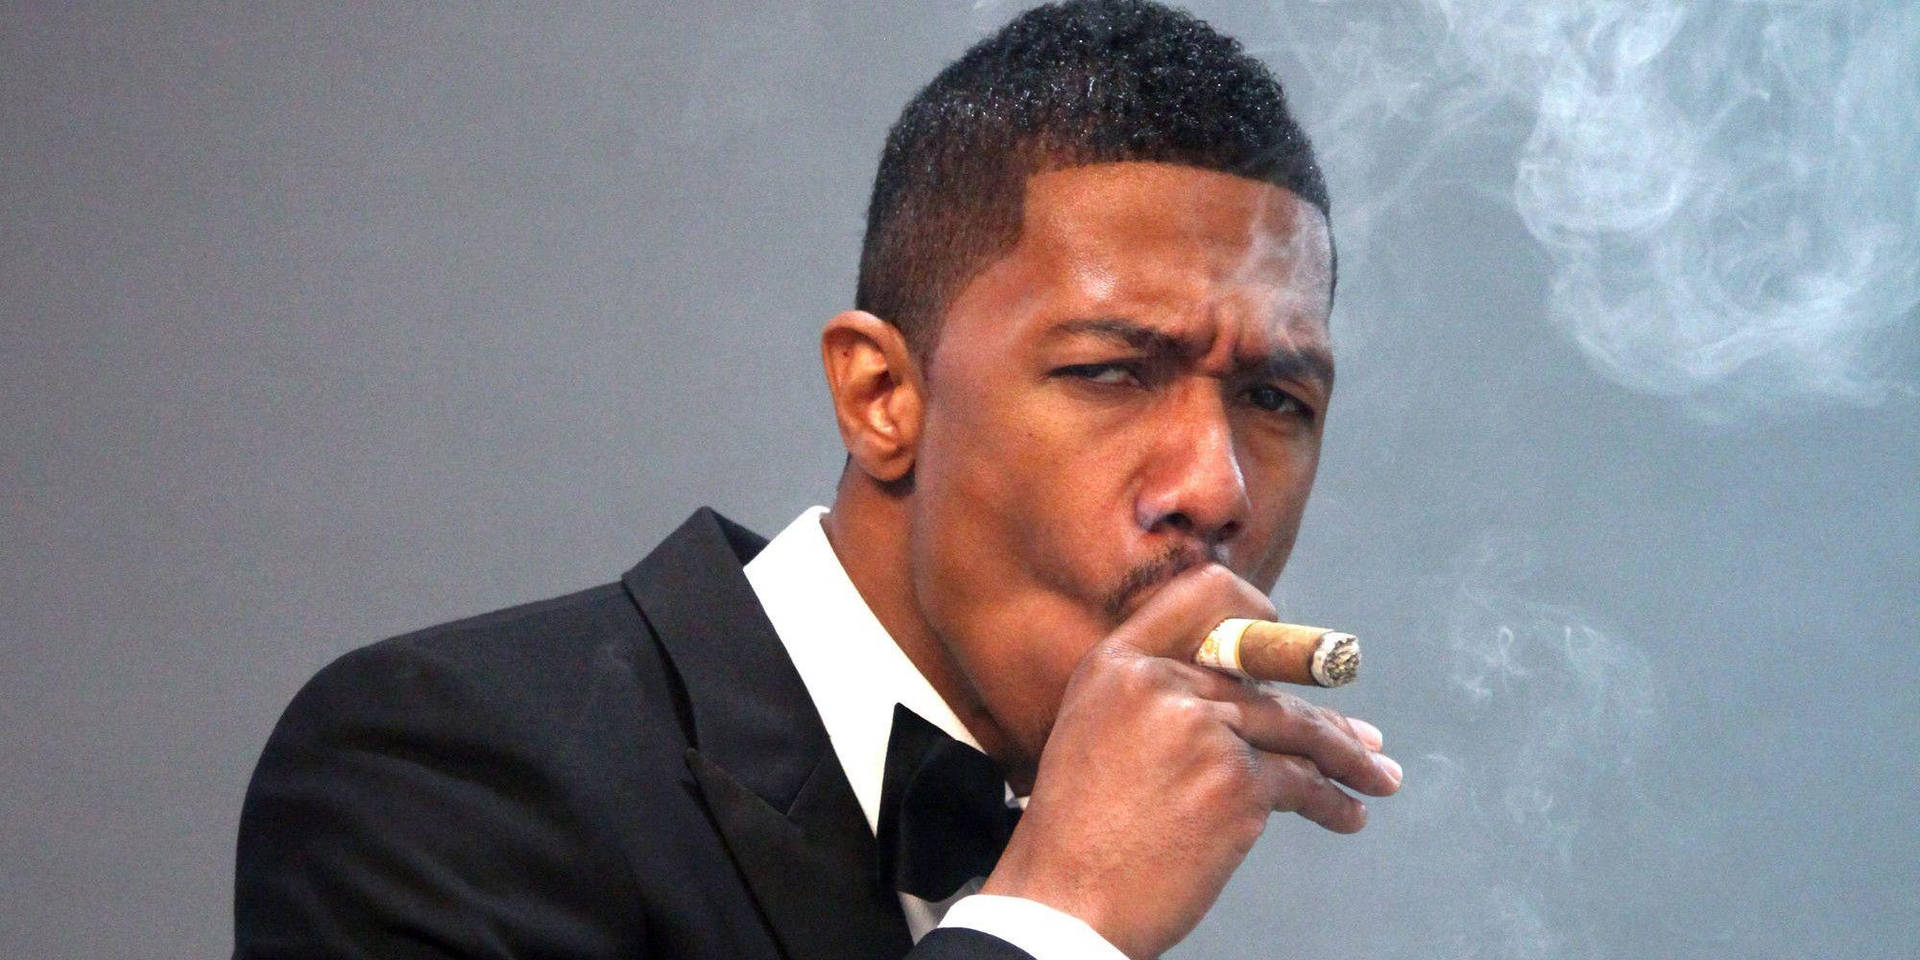 Nick Cannon With Cigar Background